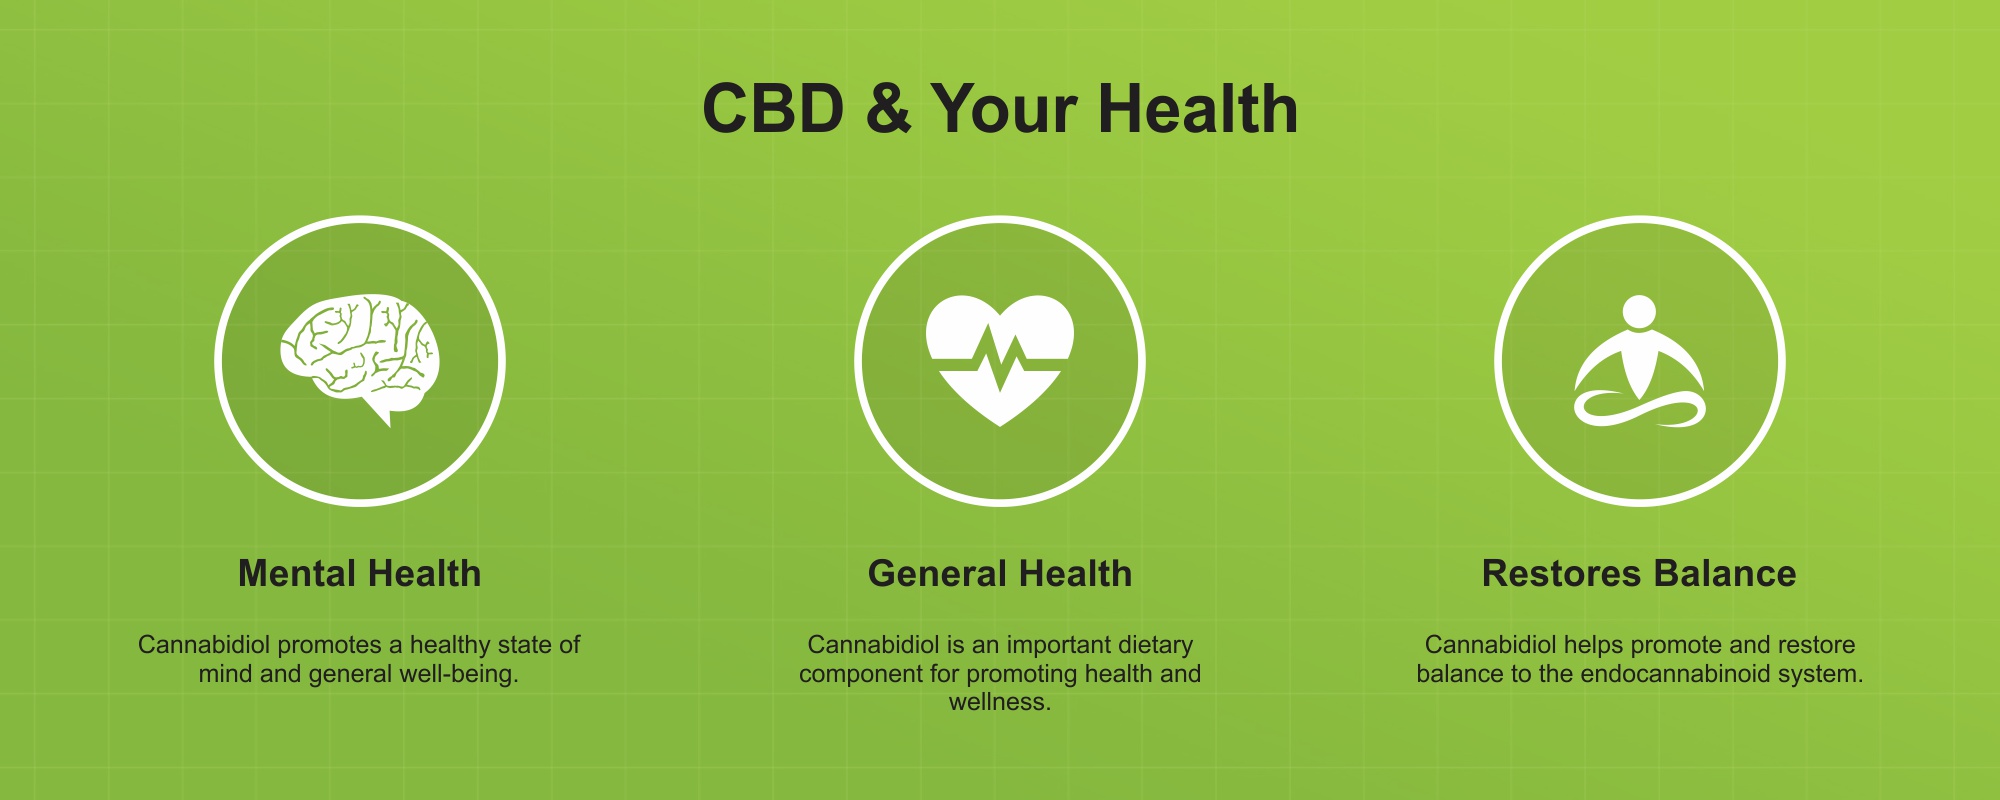 Wholesale CBD Oil Products For Distributors